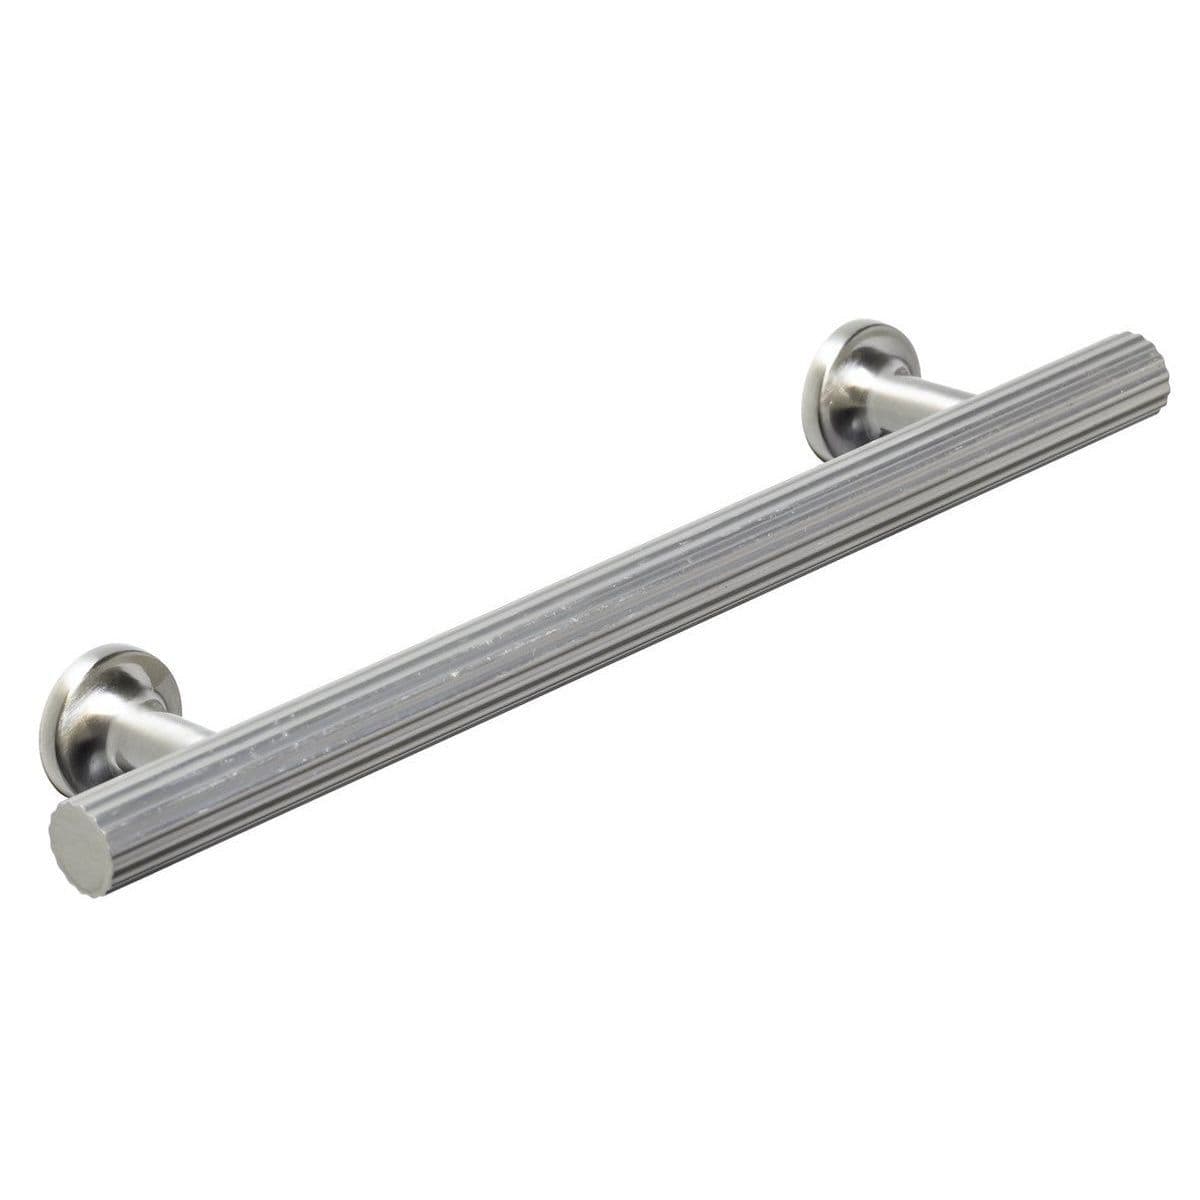 STRAND RIBBED T BAR Cupboard Handle - 192mm h/c size - 3 finishes (PWS H1144.242)